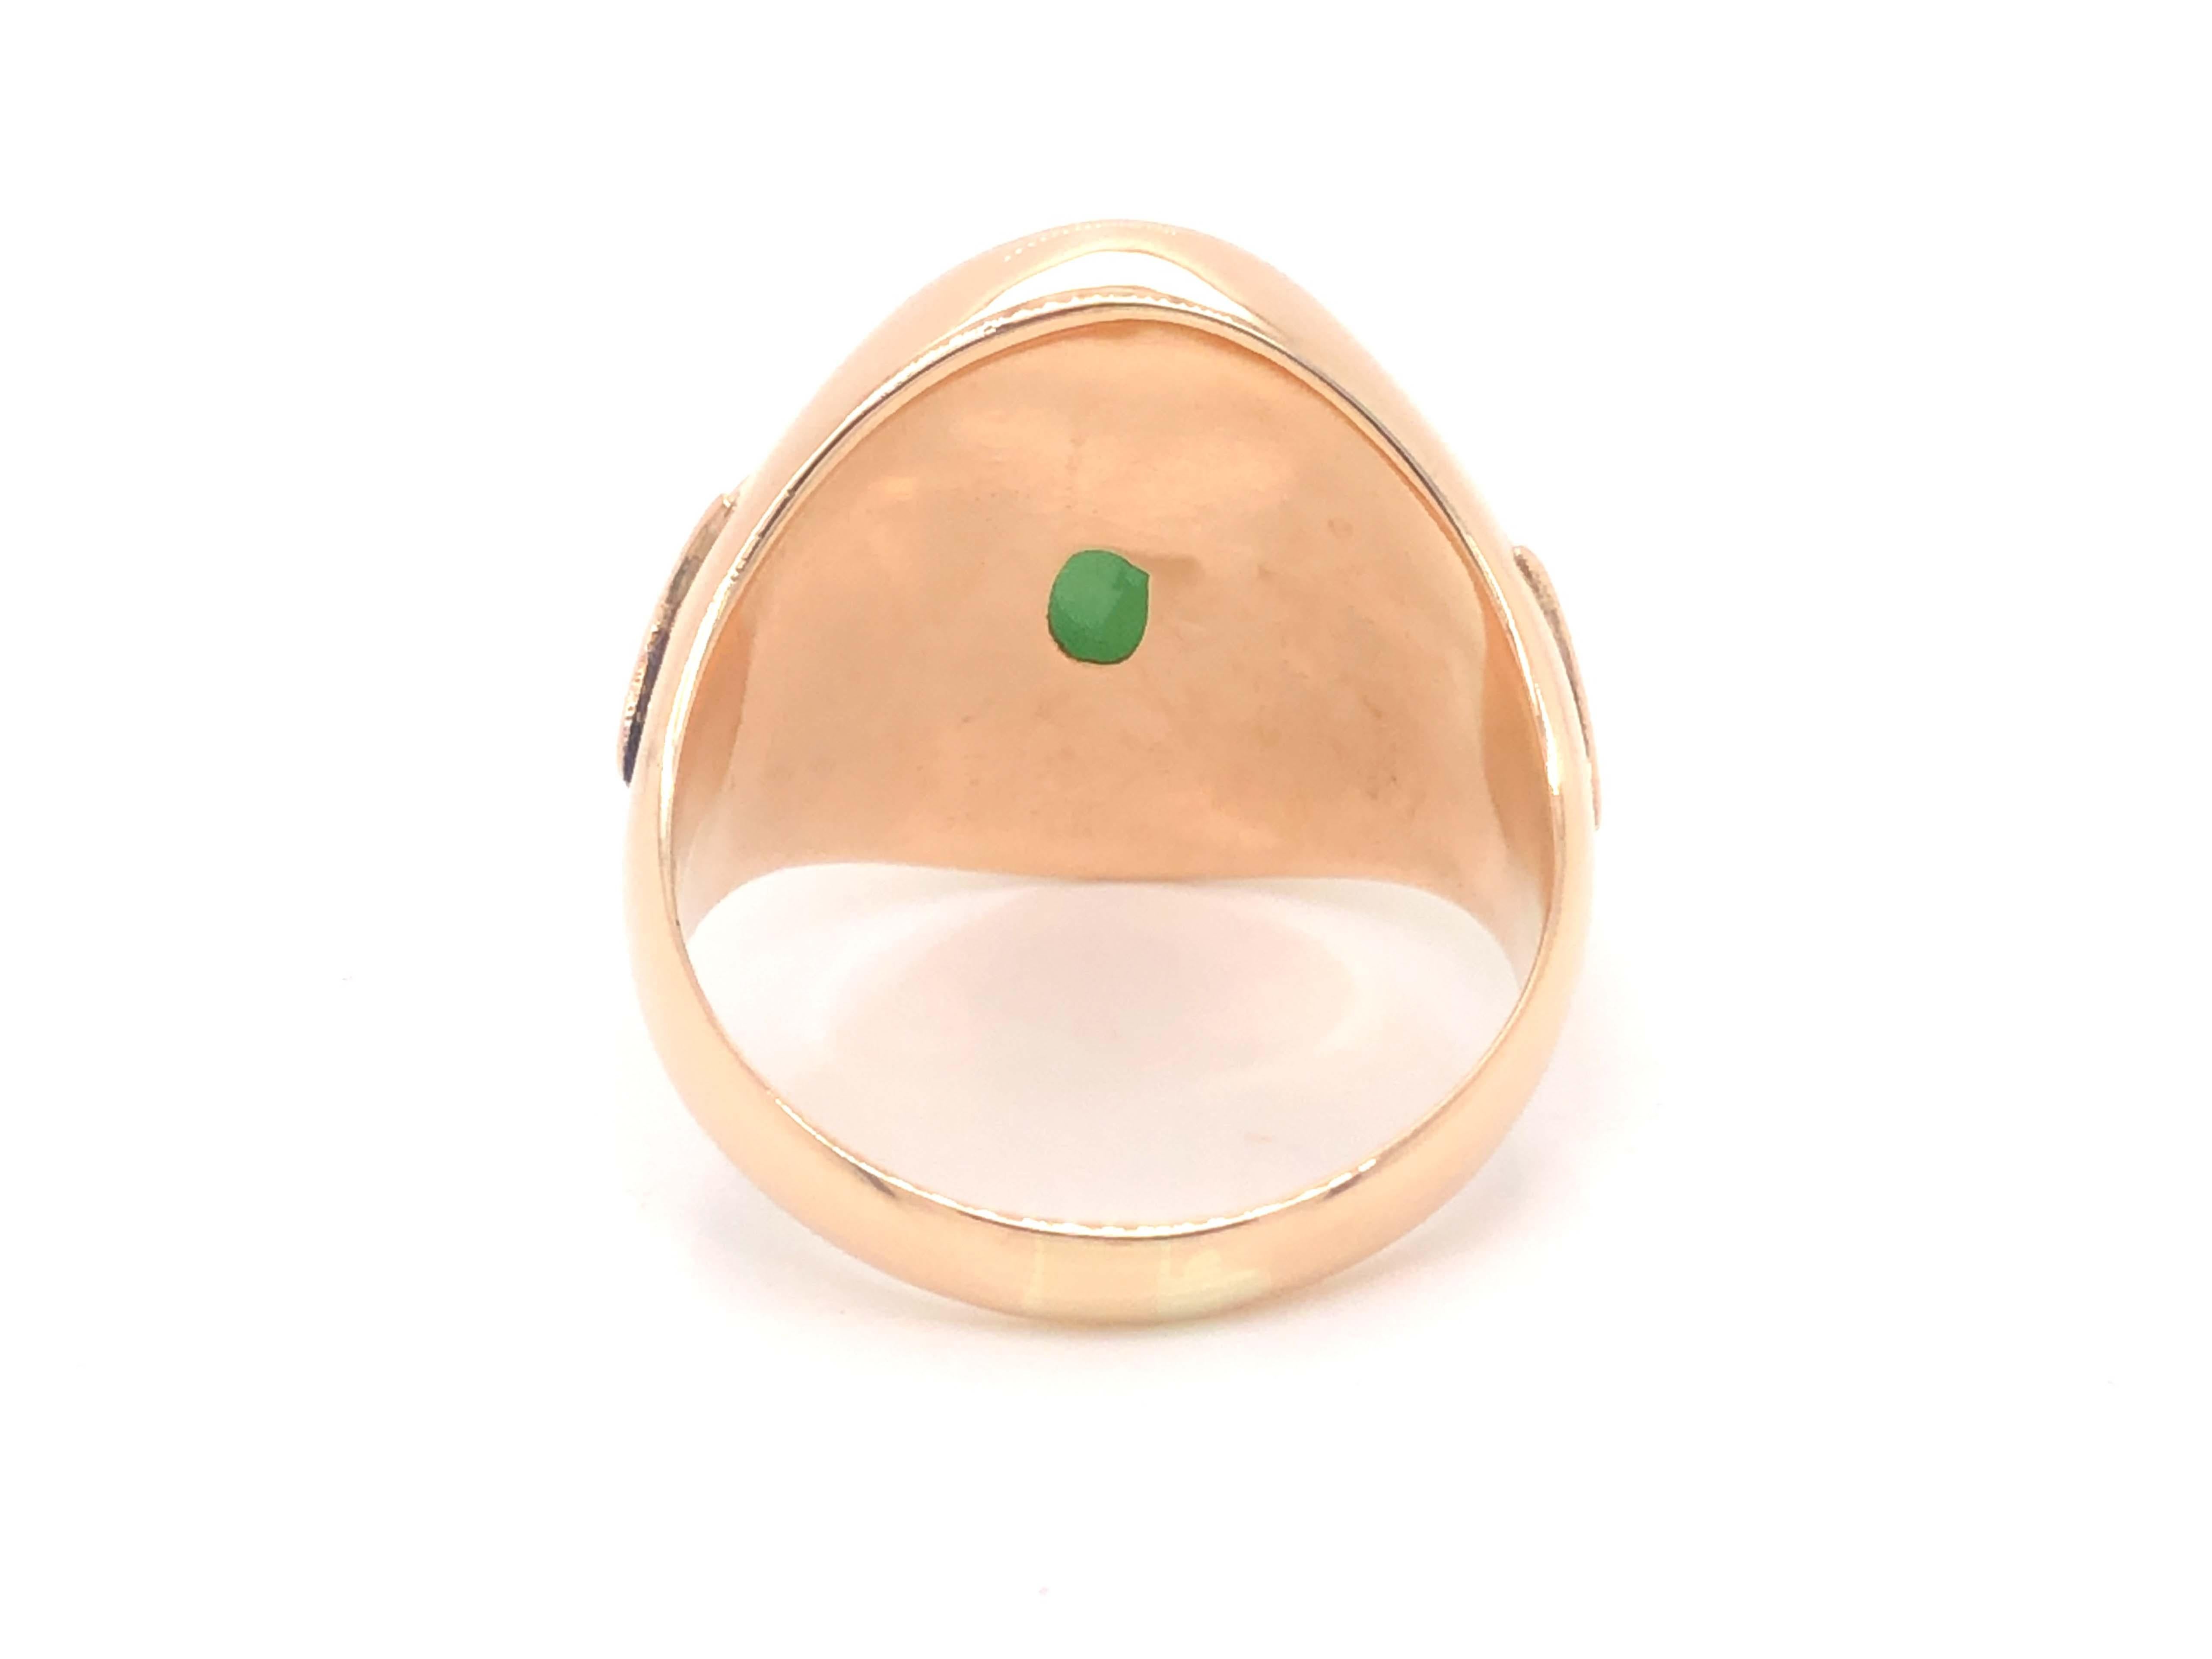 Women's Vintage Men's Oval Cabochon Large Green Jade Ring 14k Yellow Gold